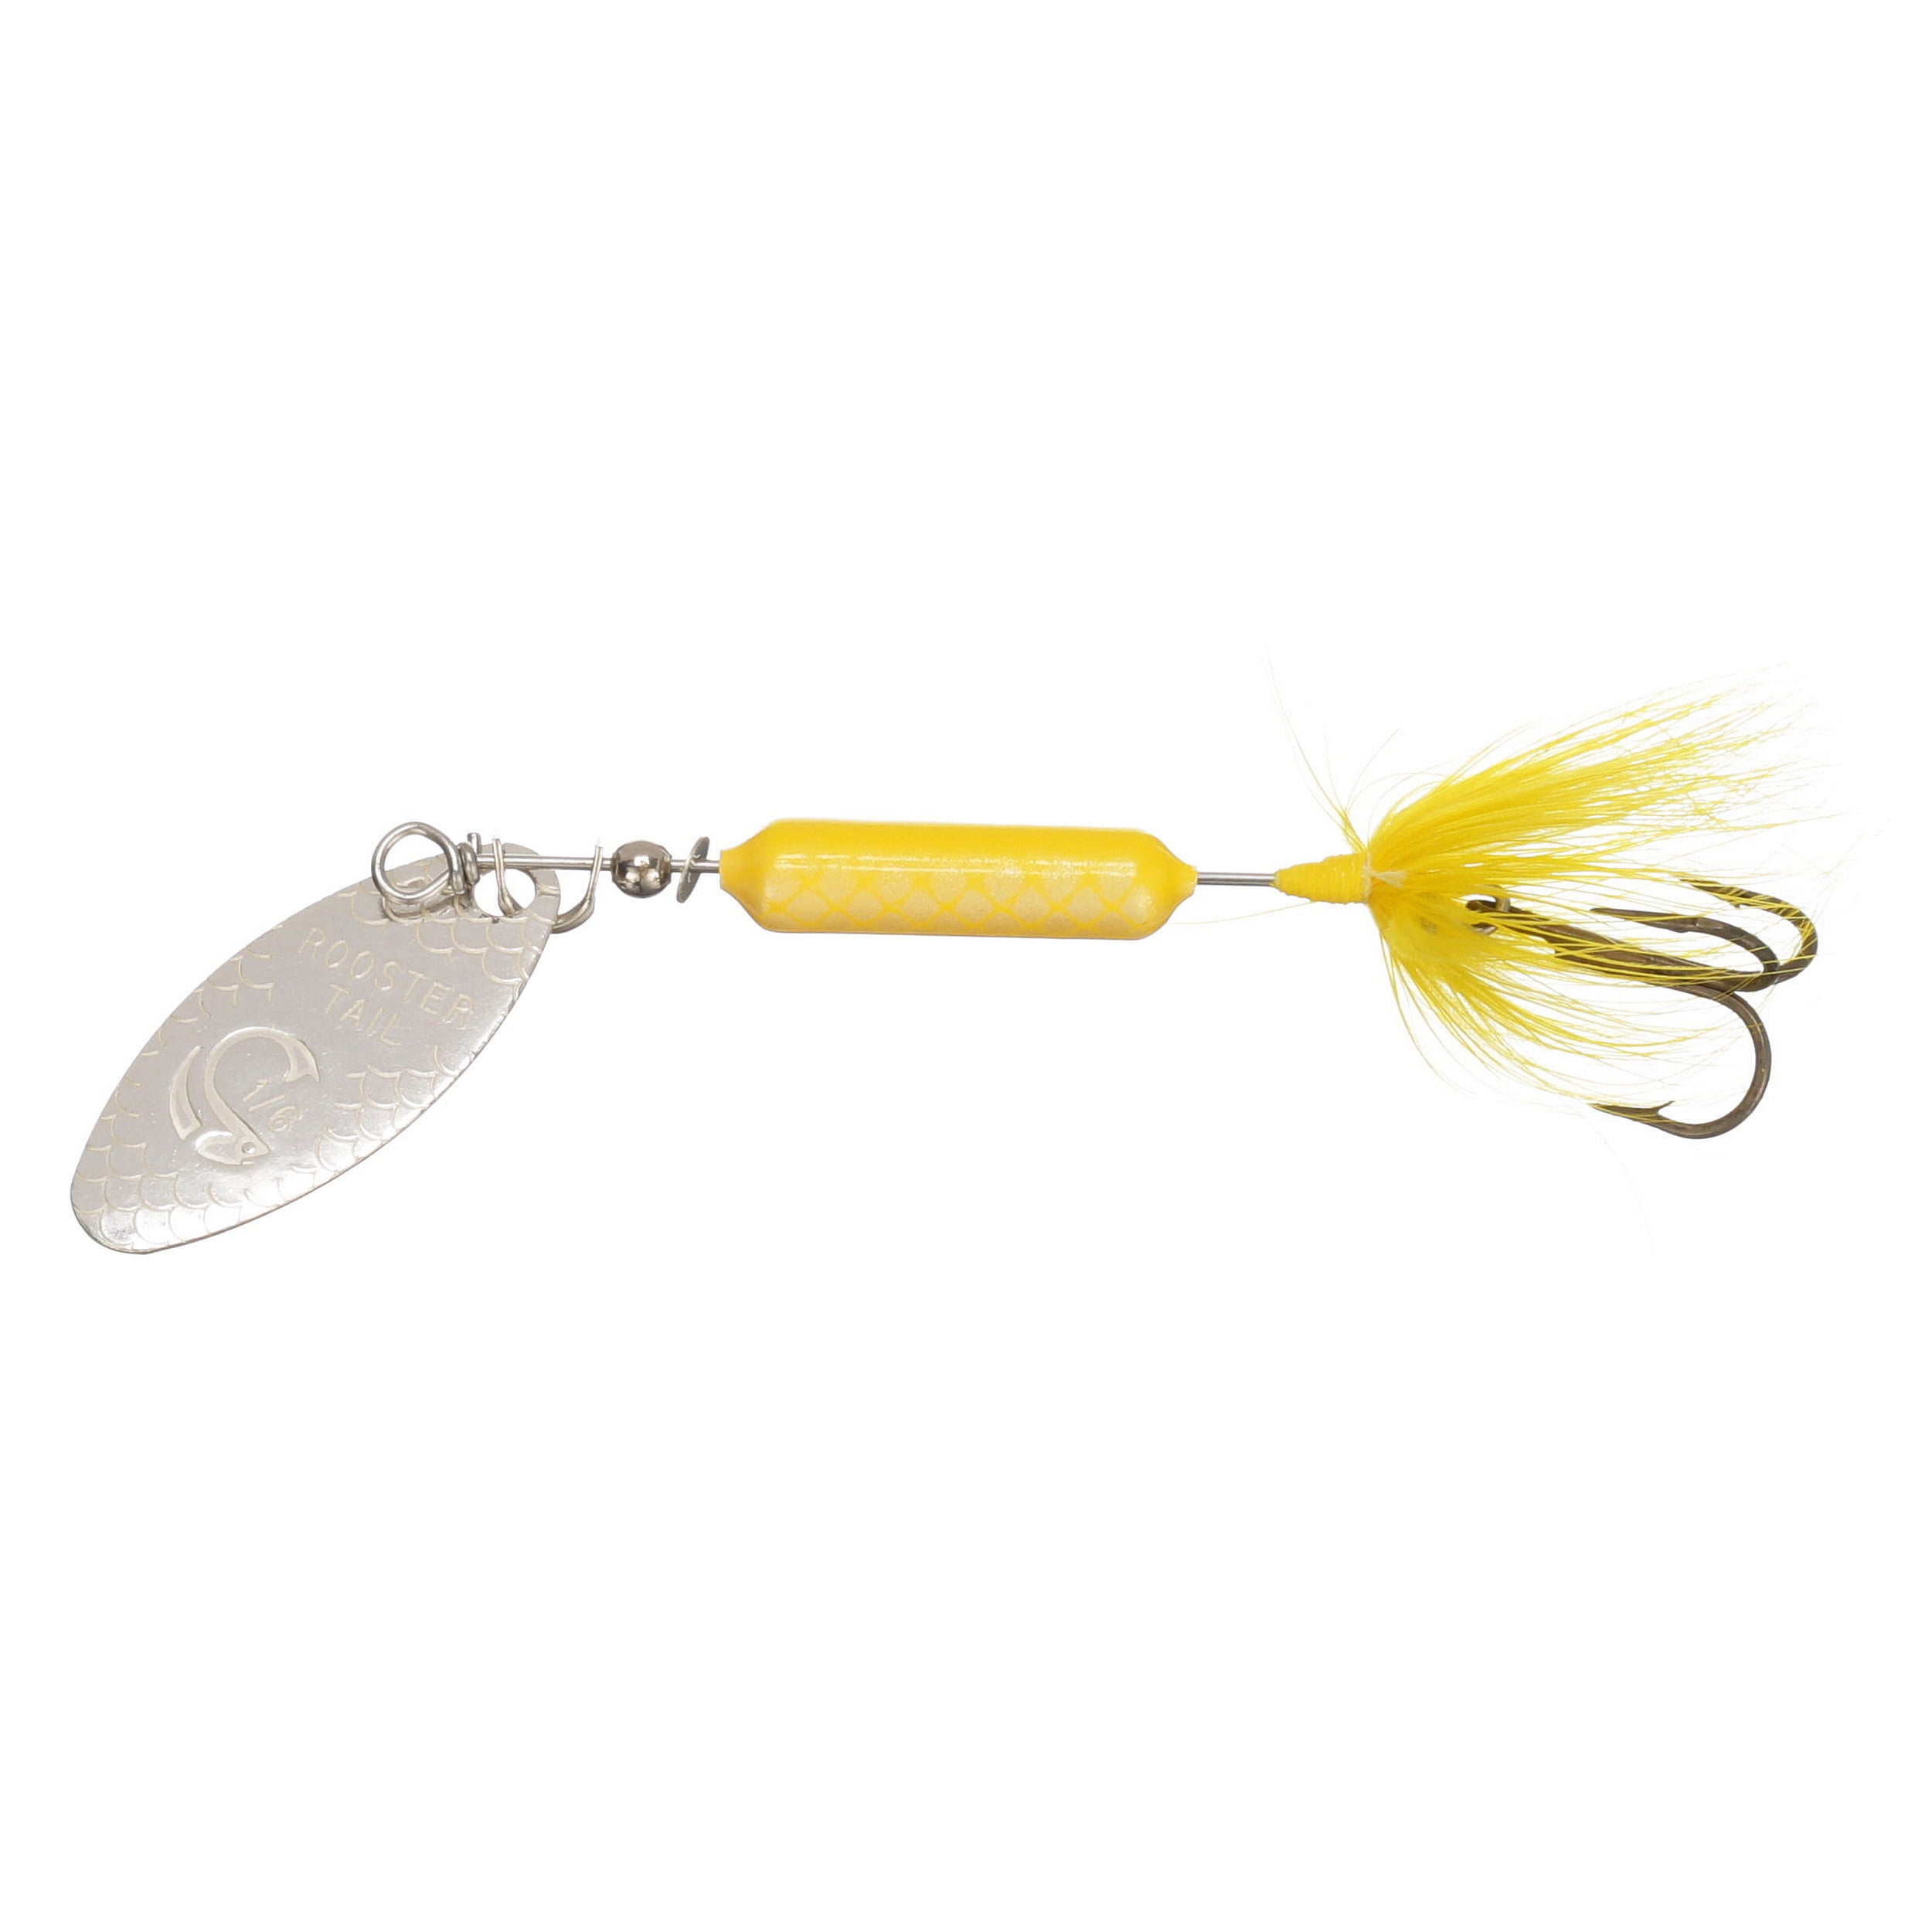 Worden's® Original Yellow Rooster Tail®, Inline Spinnerbait Fishing Lure, 1/ 6 oz Carded Pack 